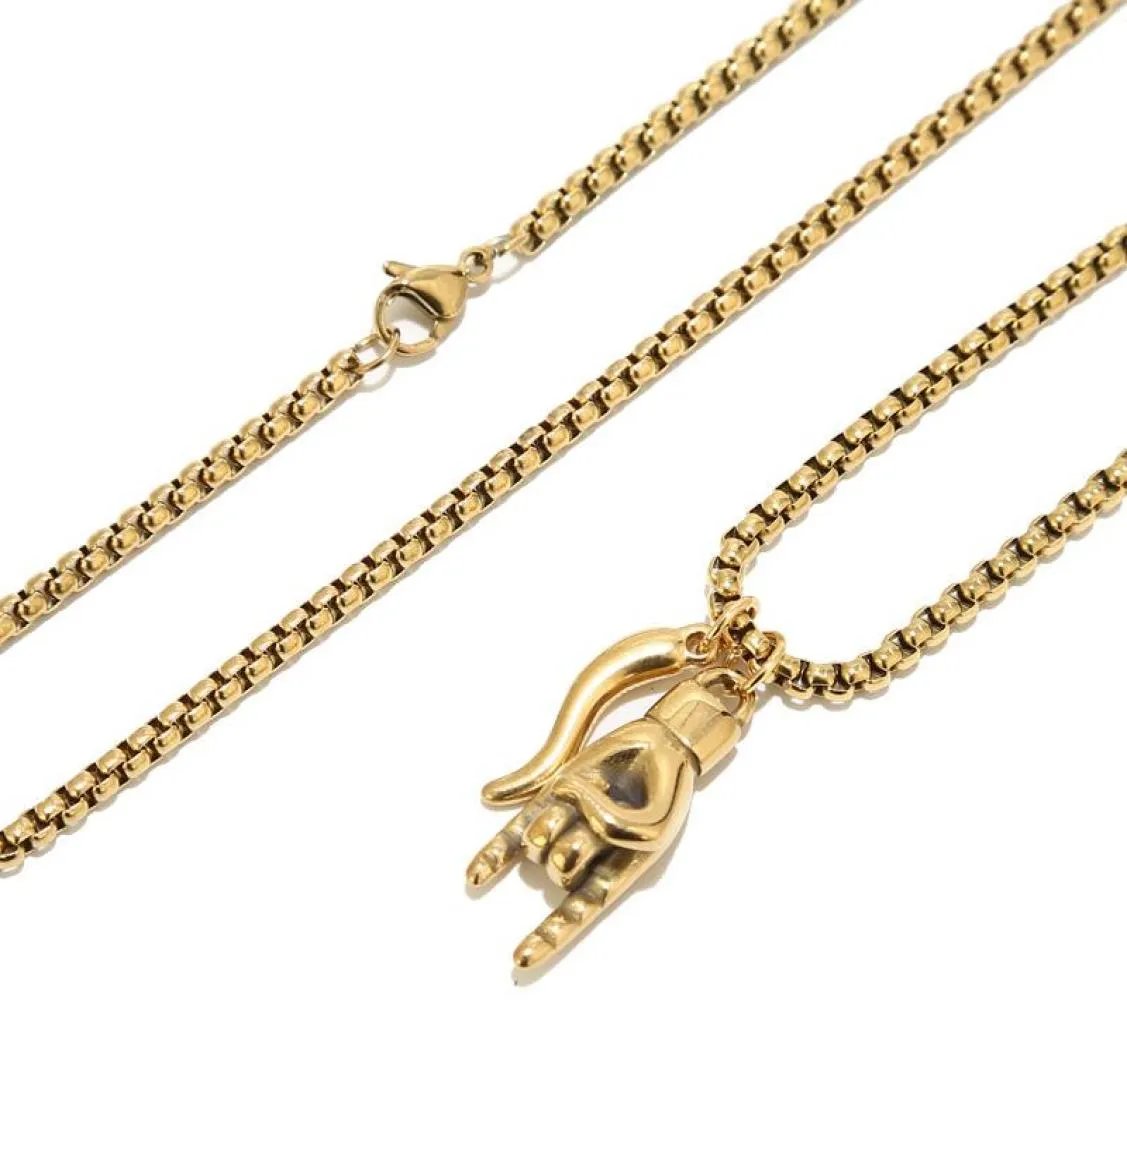 Pendant Necklaces Portafortuna Italian Lucky Hand Horn Anti Evil Good Luck Double Protection Amulet Charms Box Chain Necklace Stai5433415